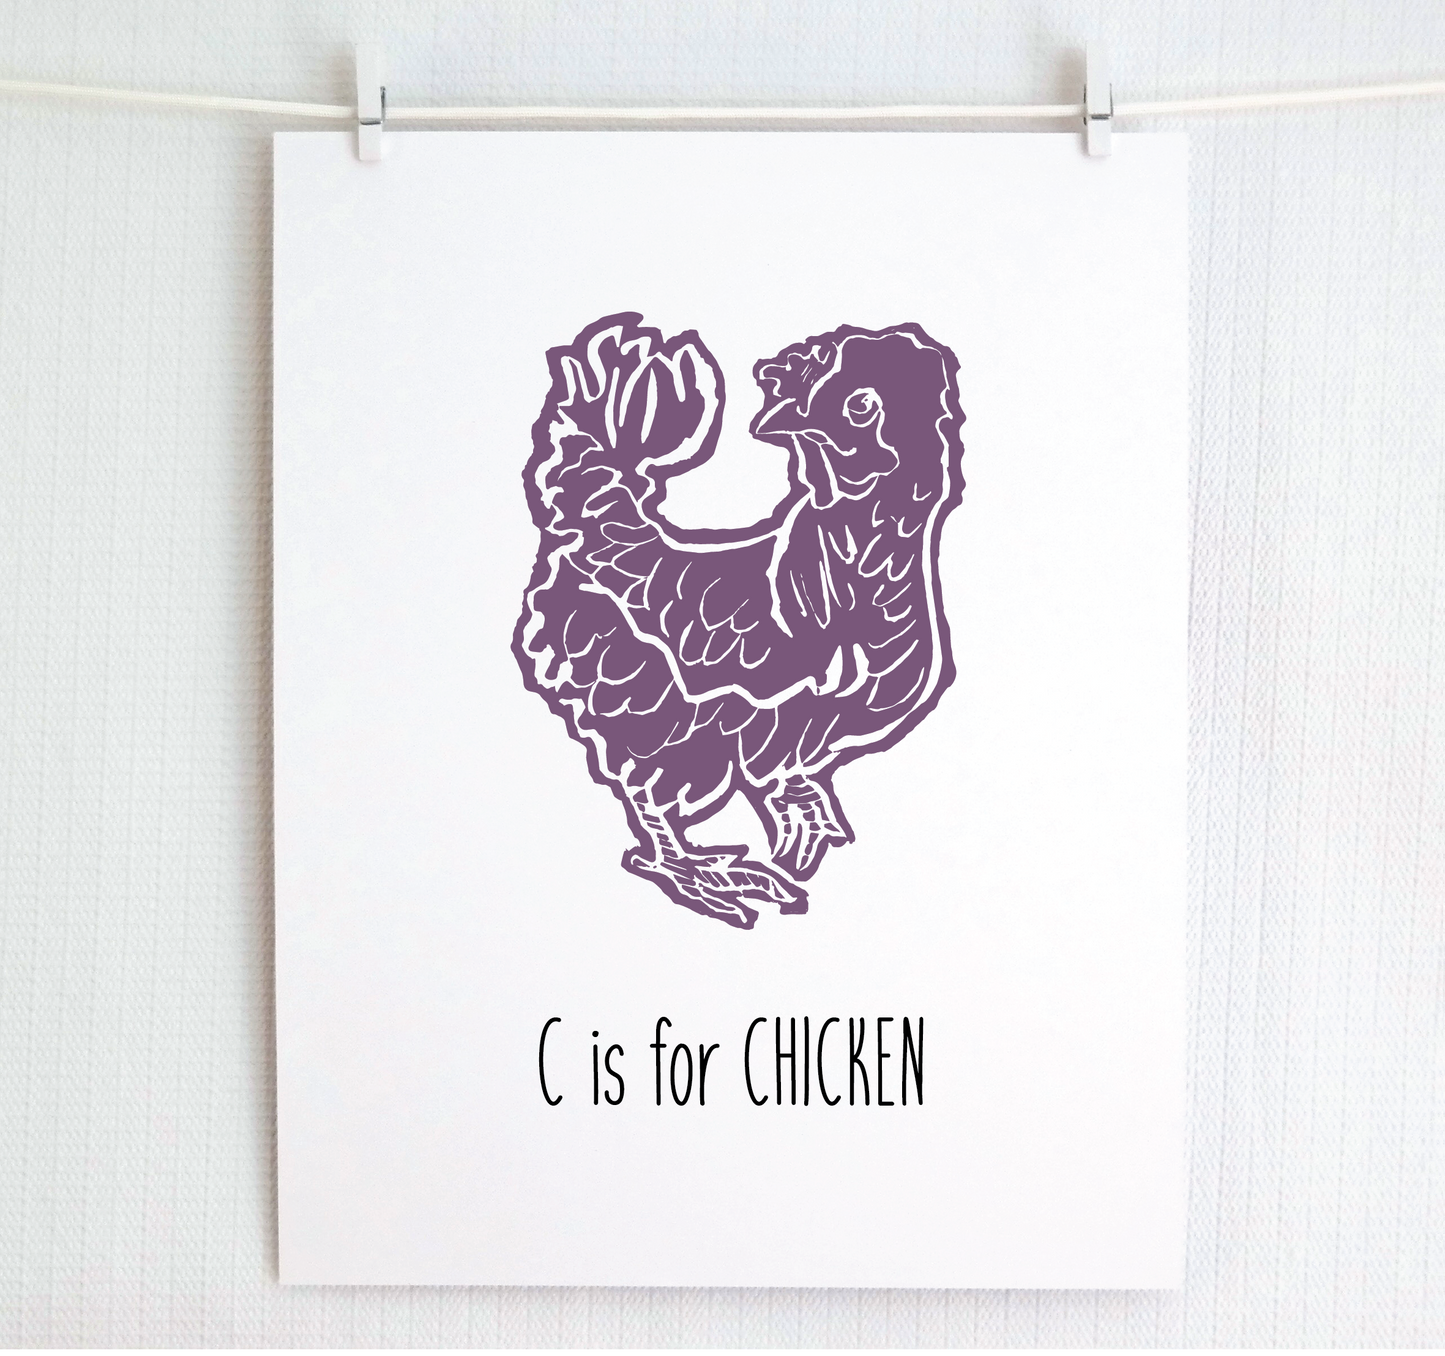 C is for Chicken